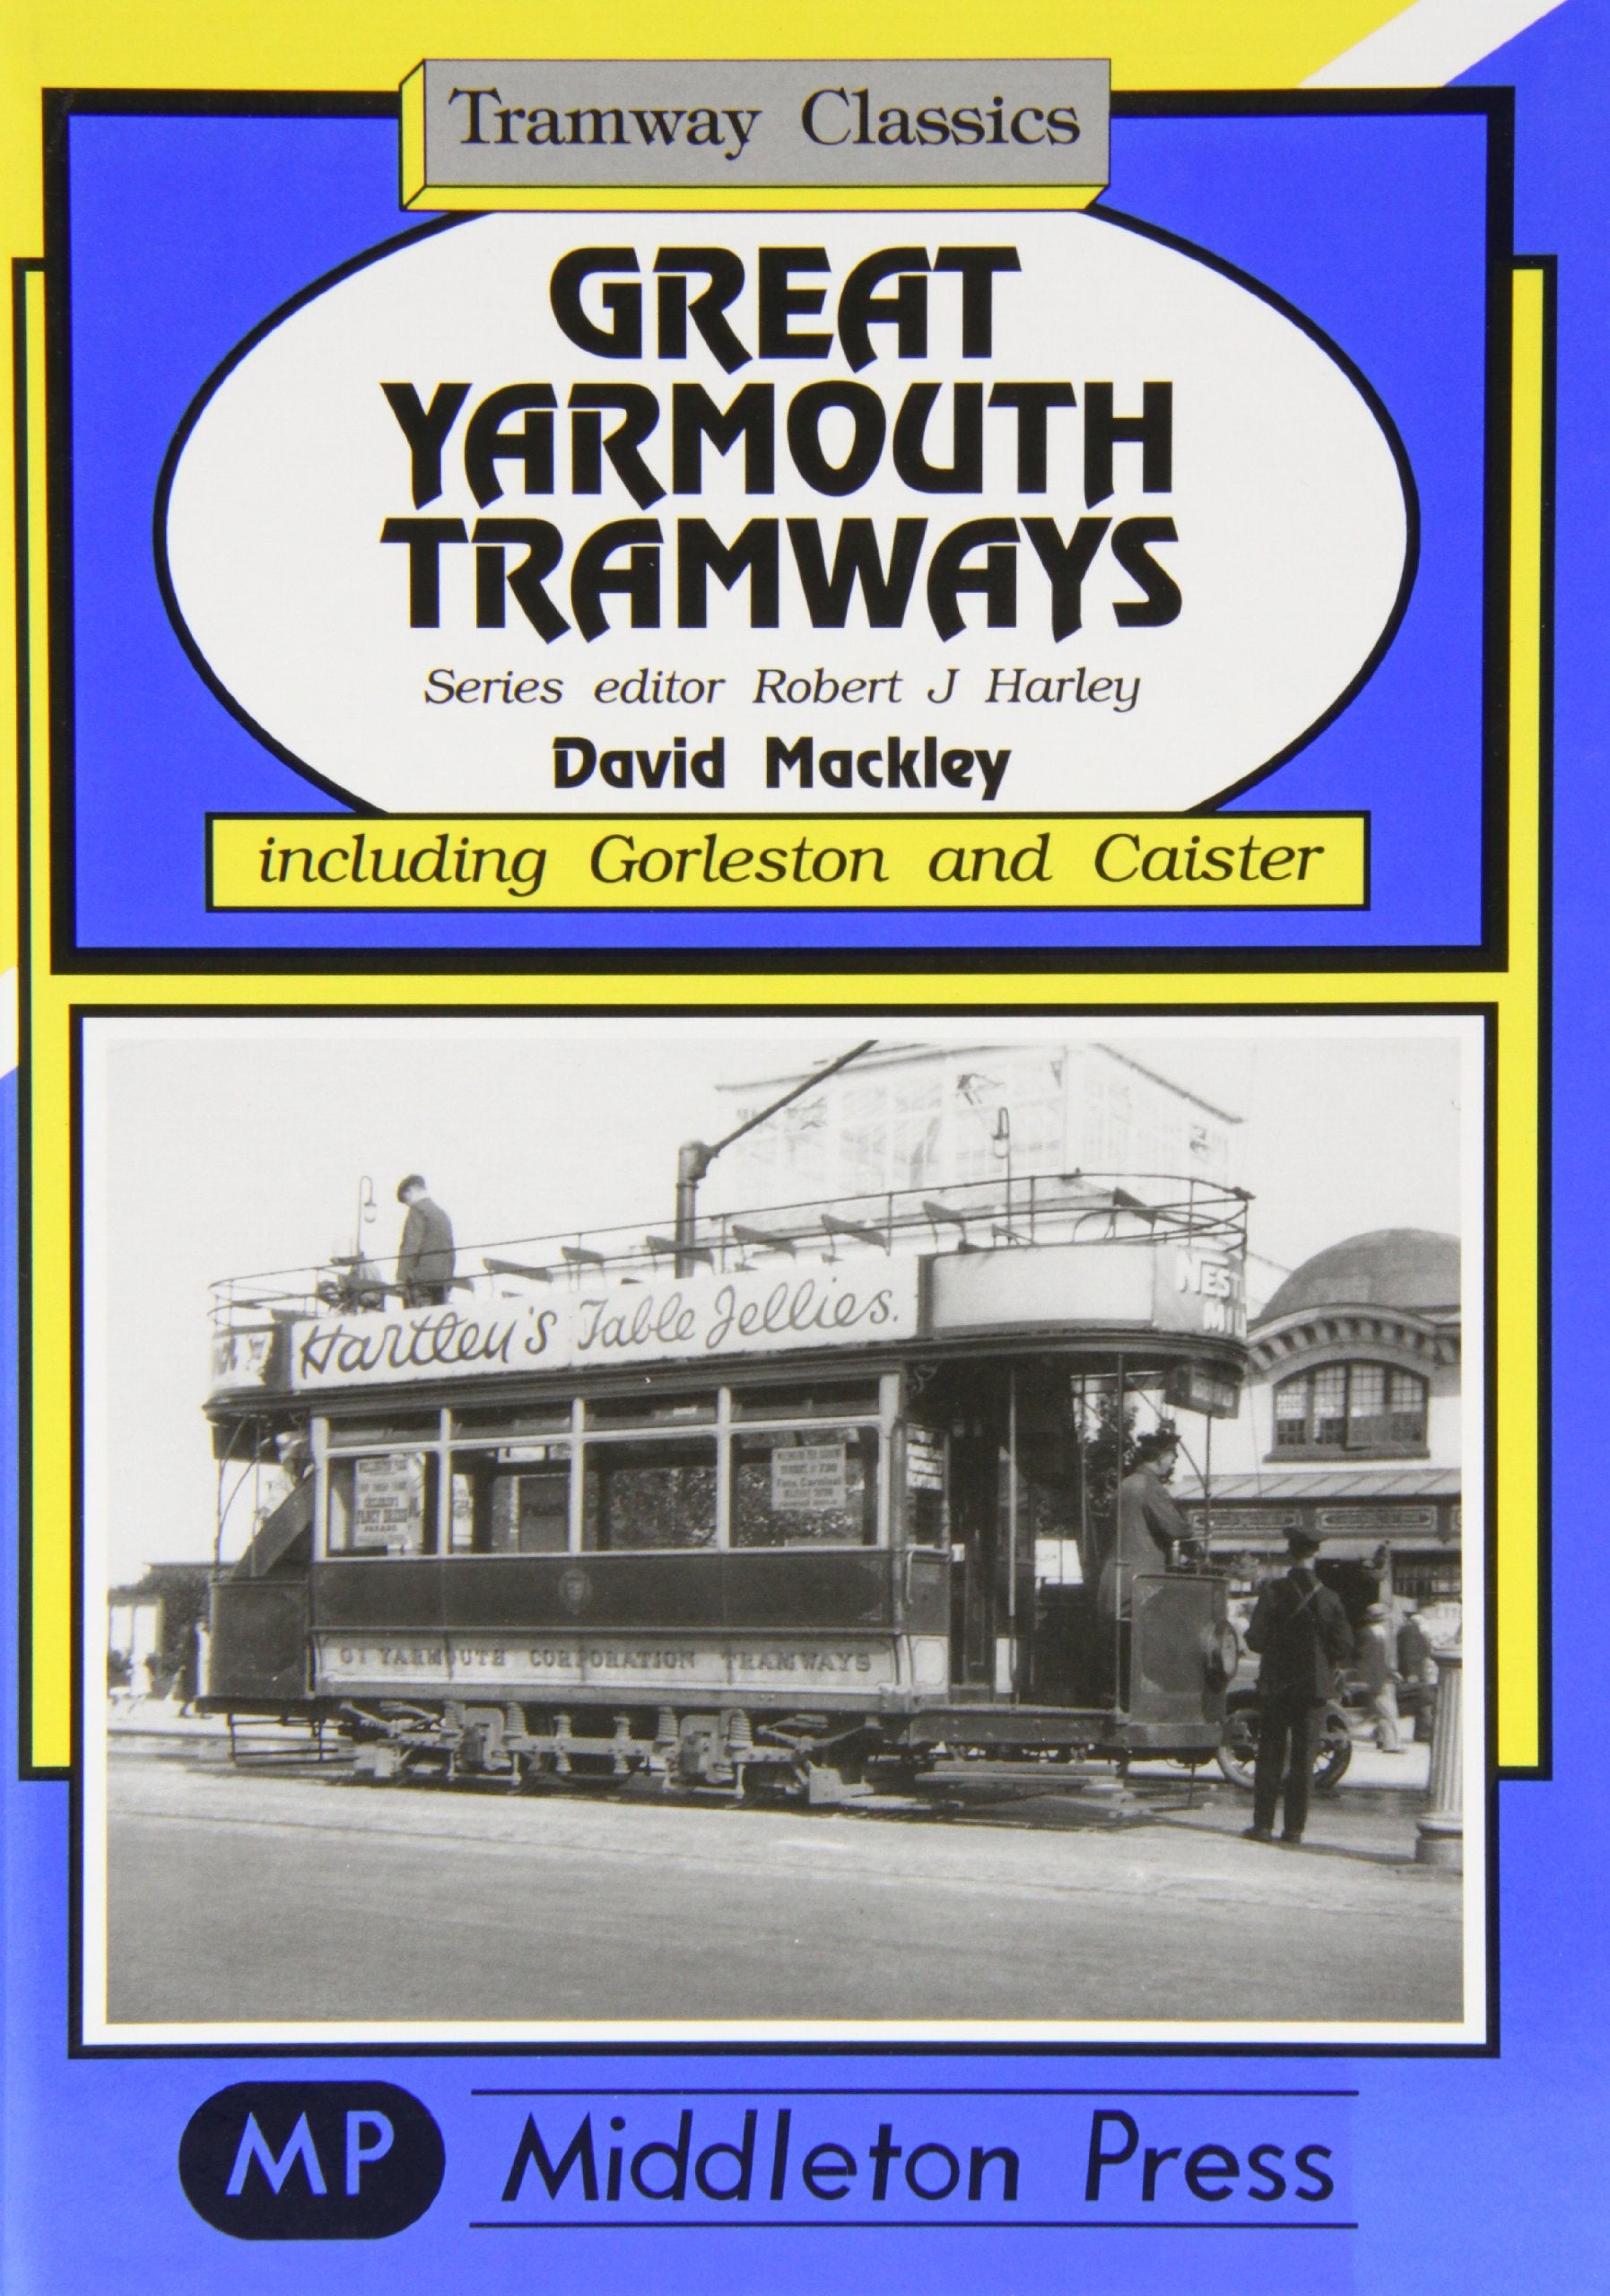 Tramway Classics Great Yarmouth Tramways including Gorleston and Caister